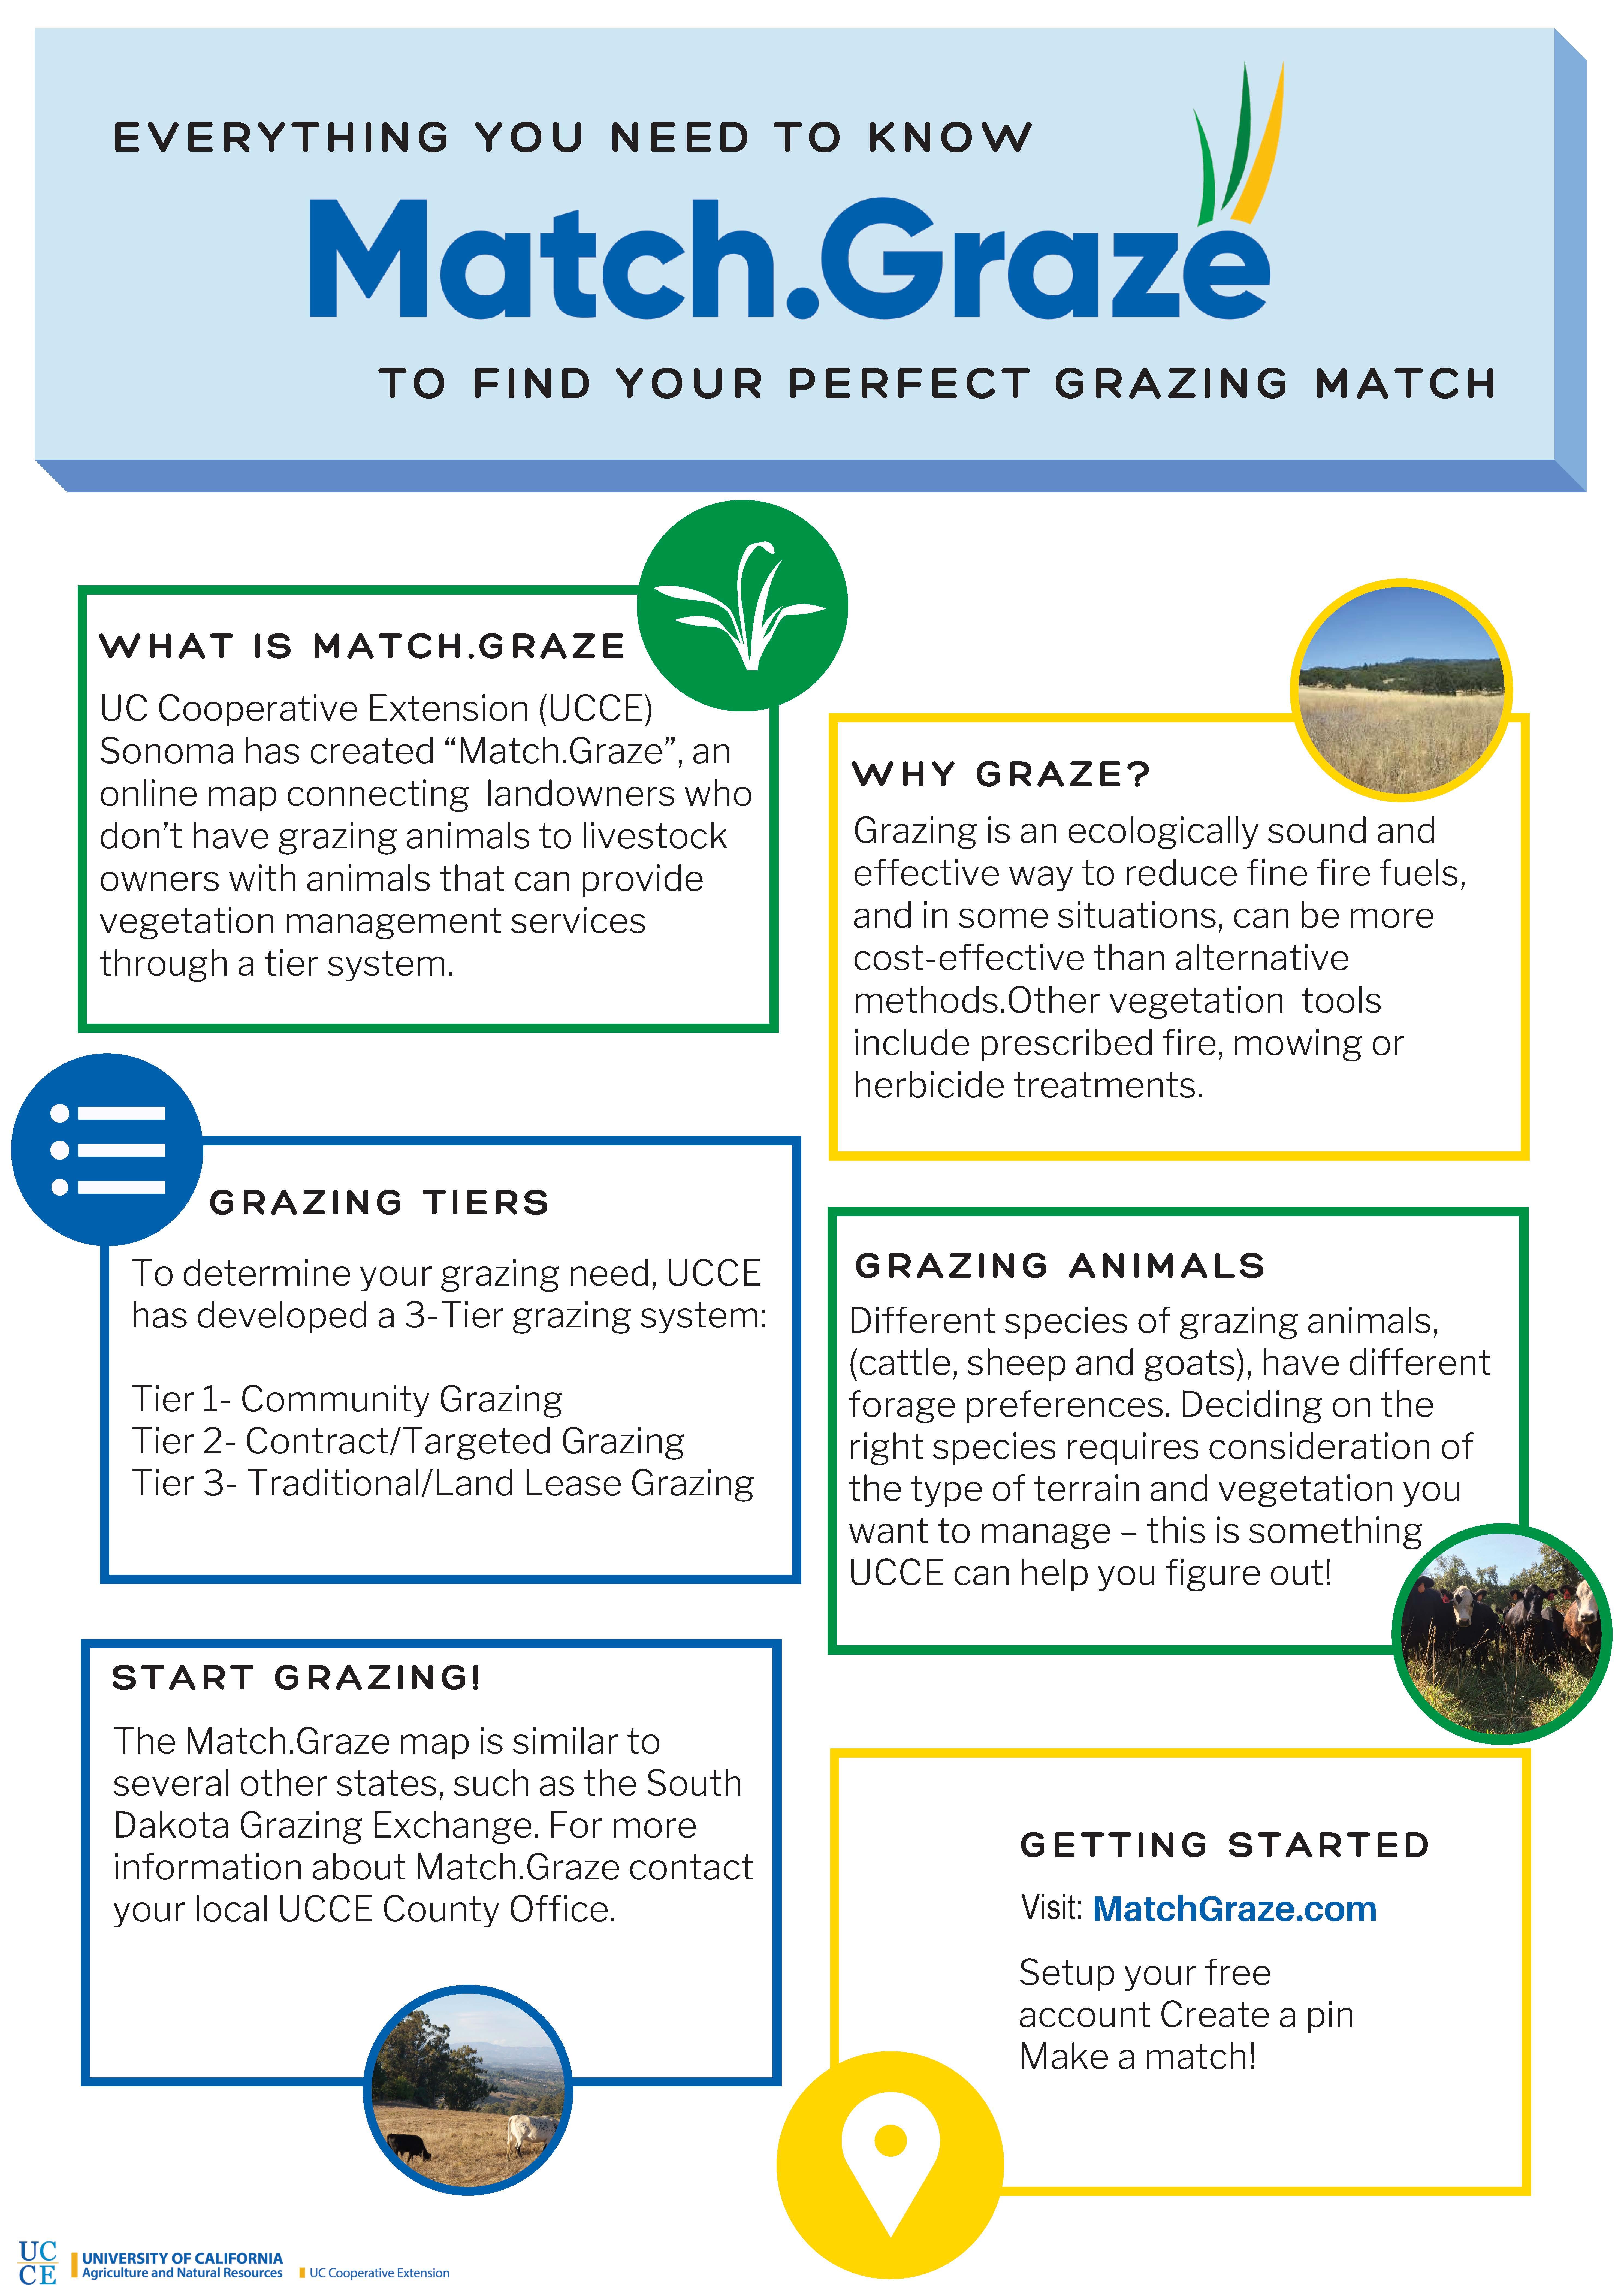 Everything you need to know about Match.Graze